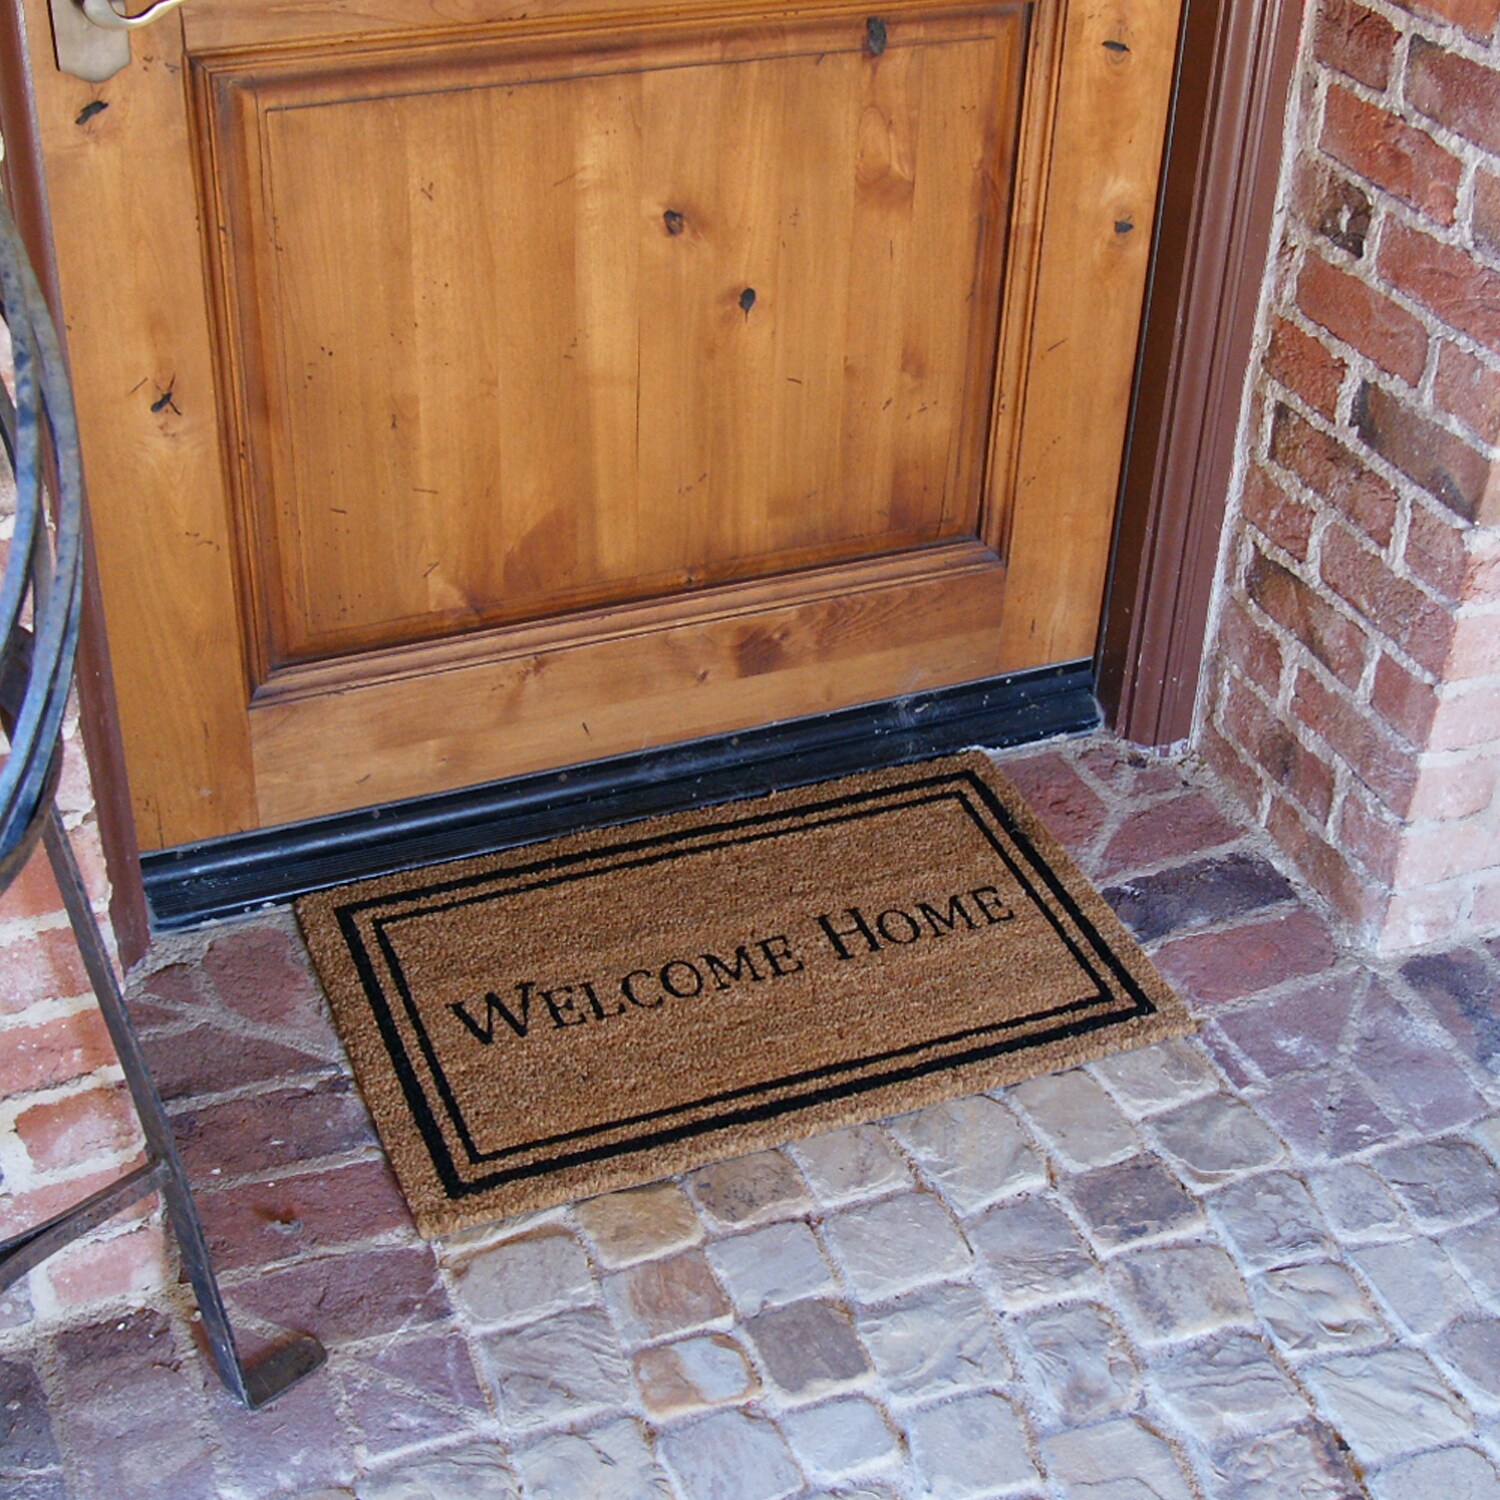 Geo Welcome Charcoal 24 in. x 36 in. Door Mat by TrafficMaster Use